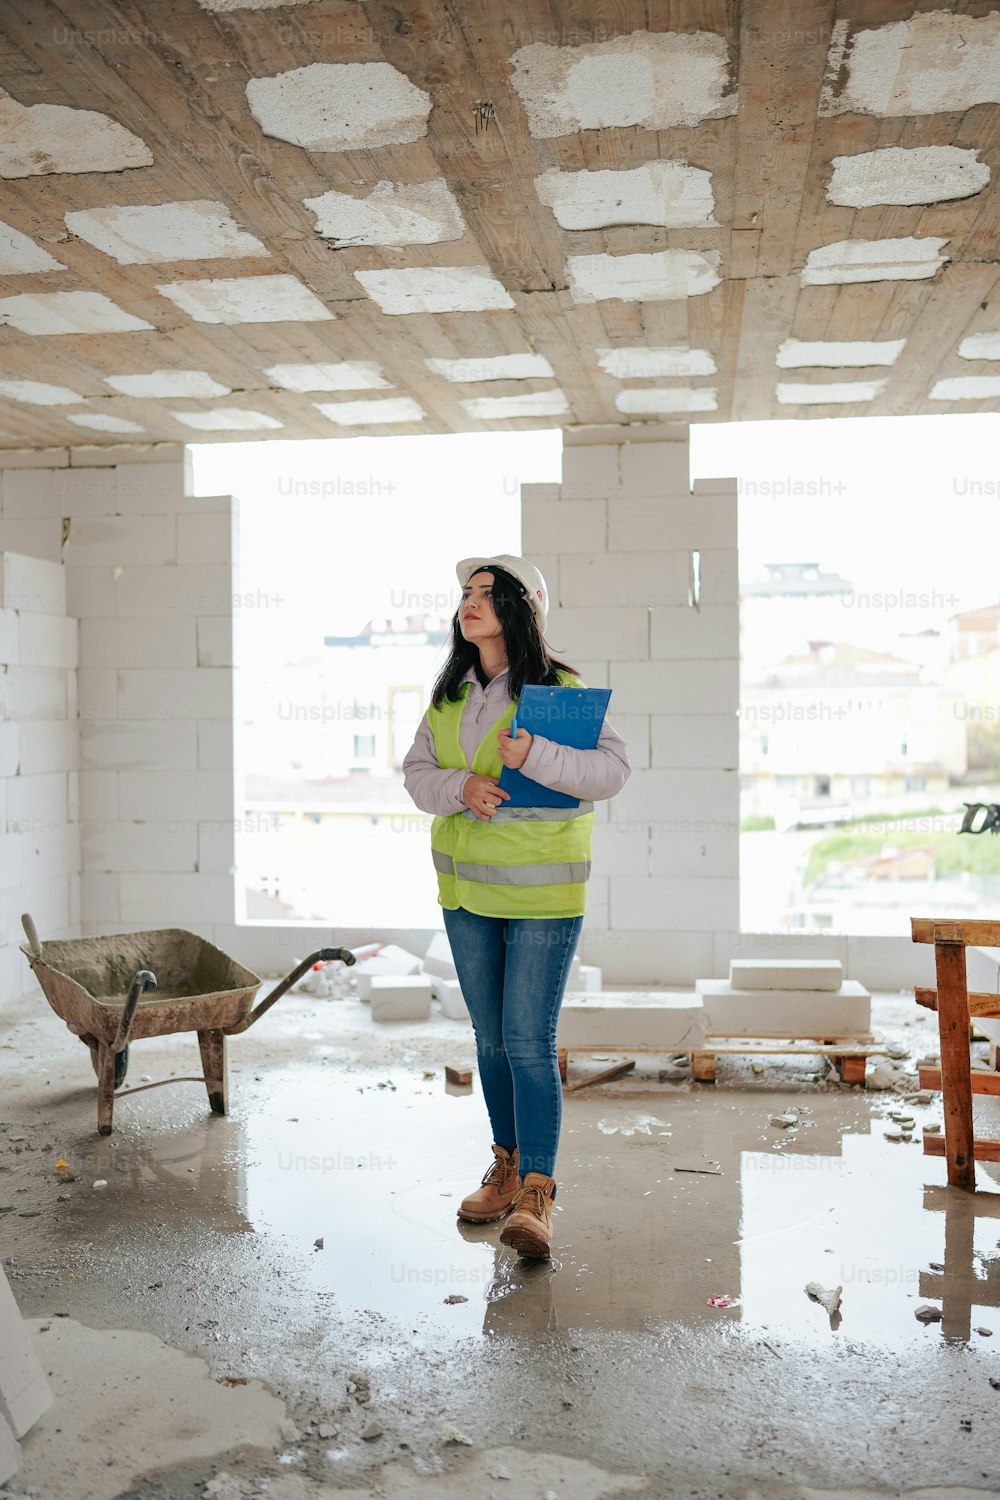 a woman standing in a room under construction